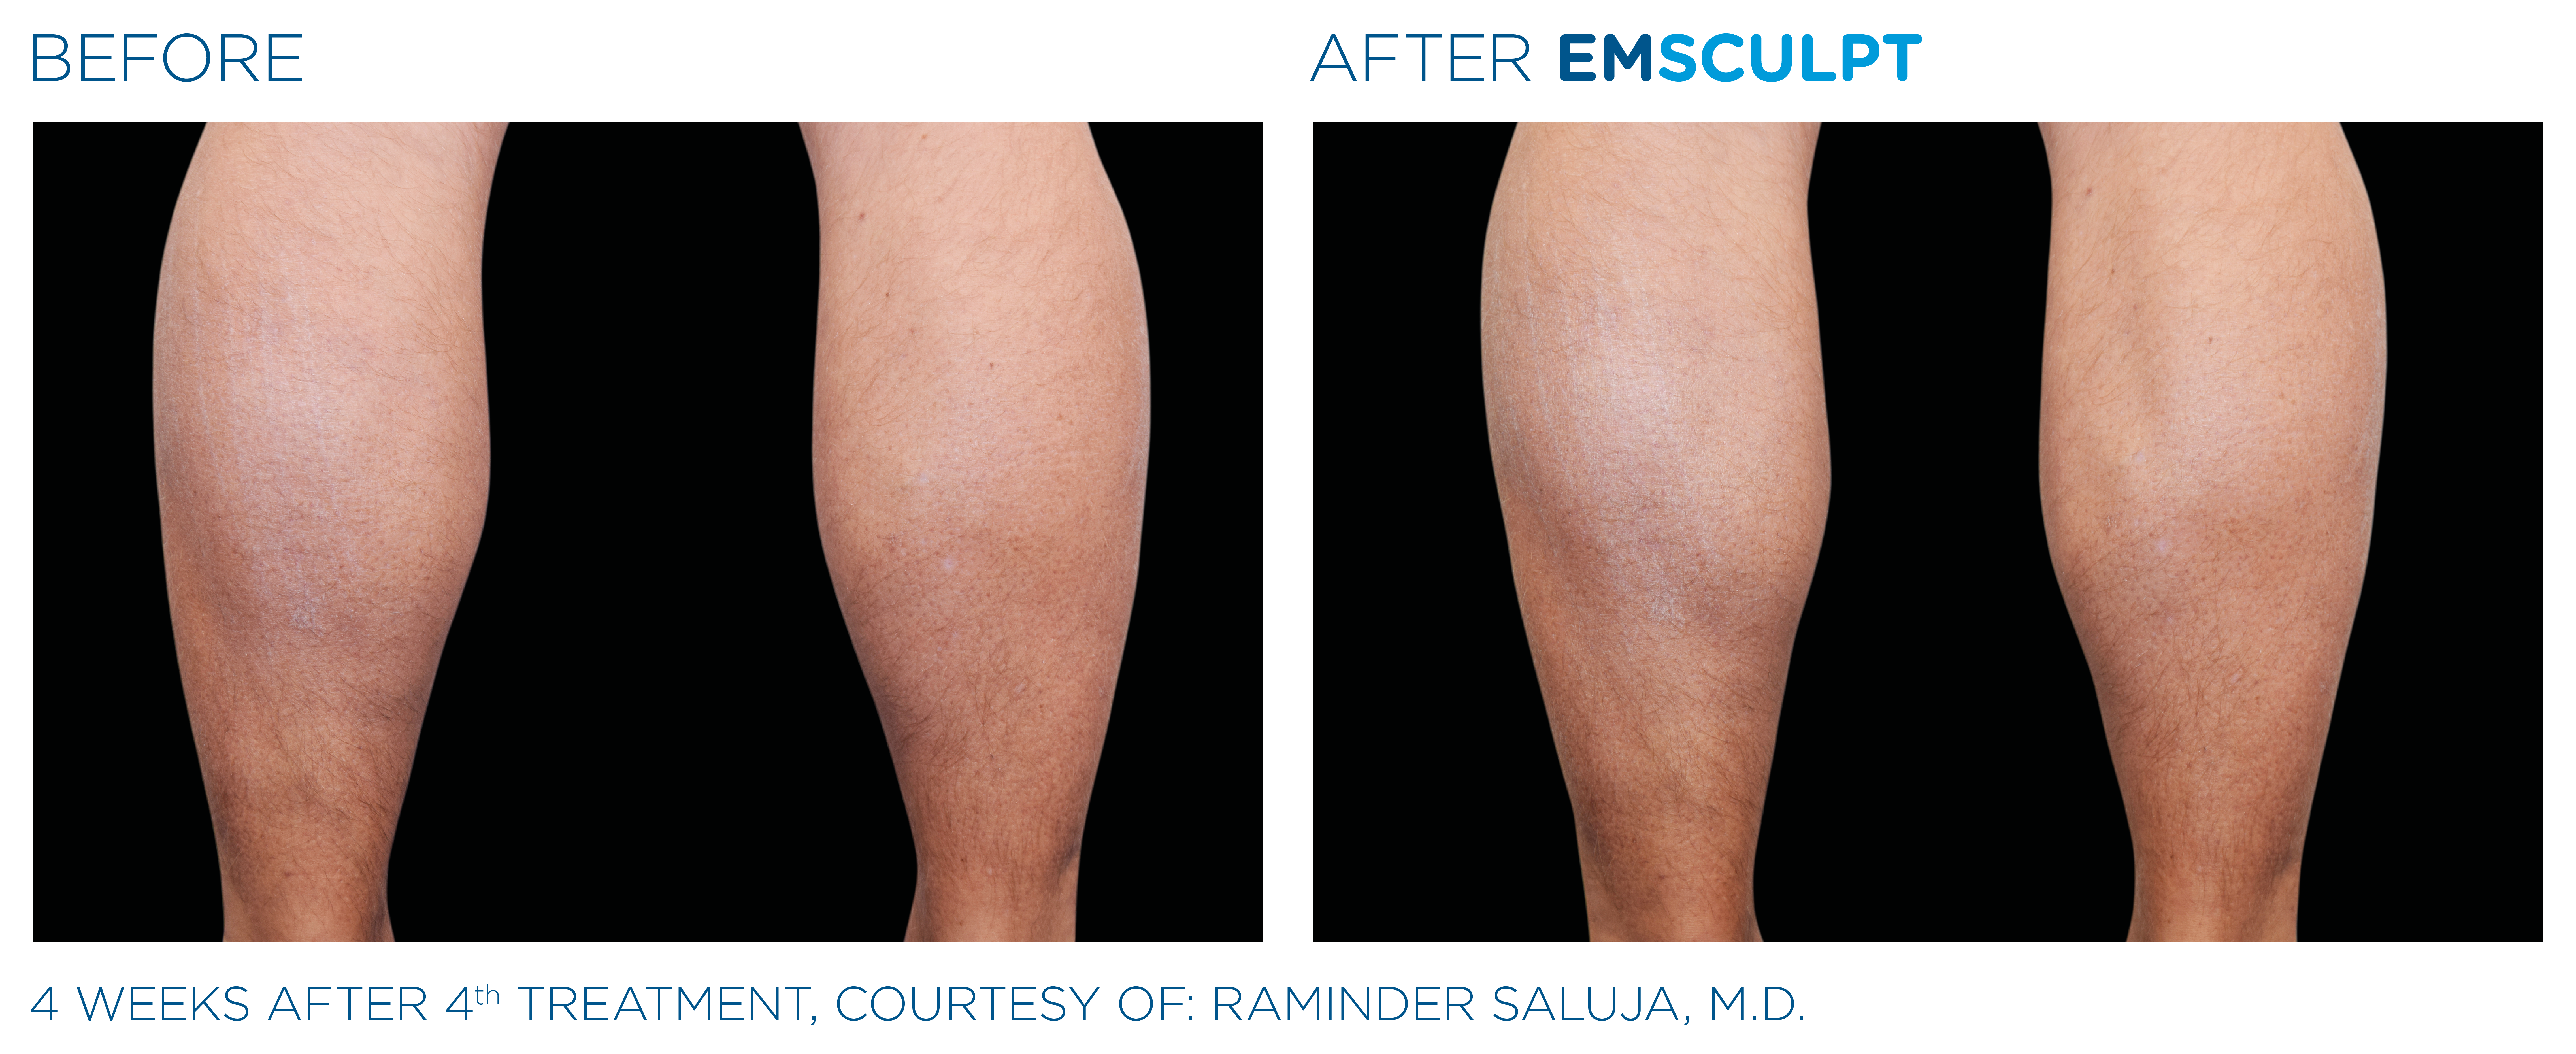 patient's calves before and after EmSculpt treatment showing improved definition and tone